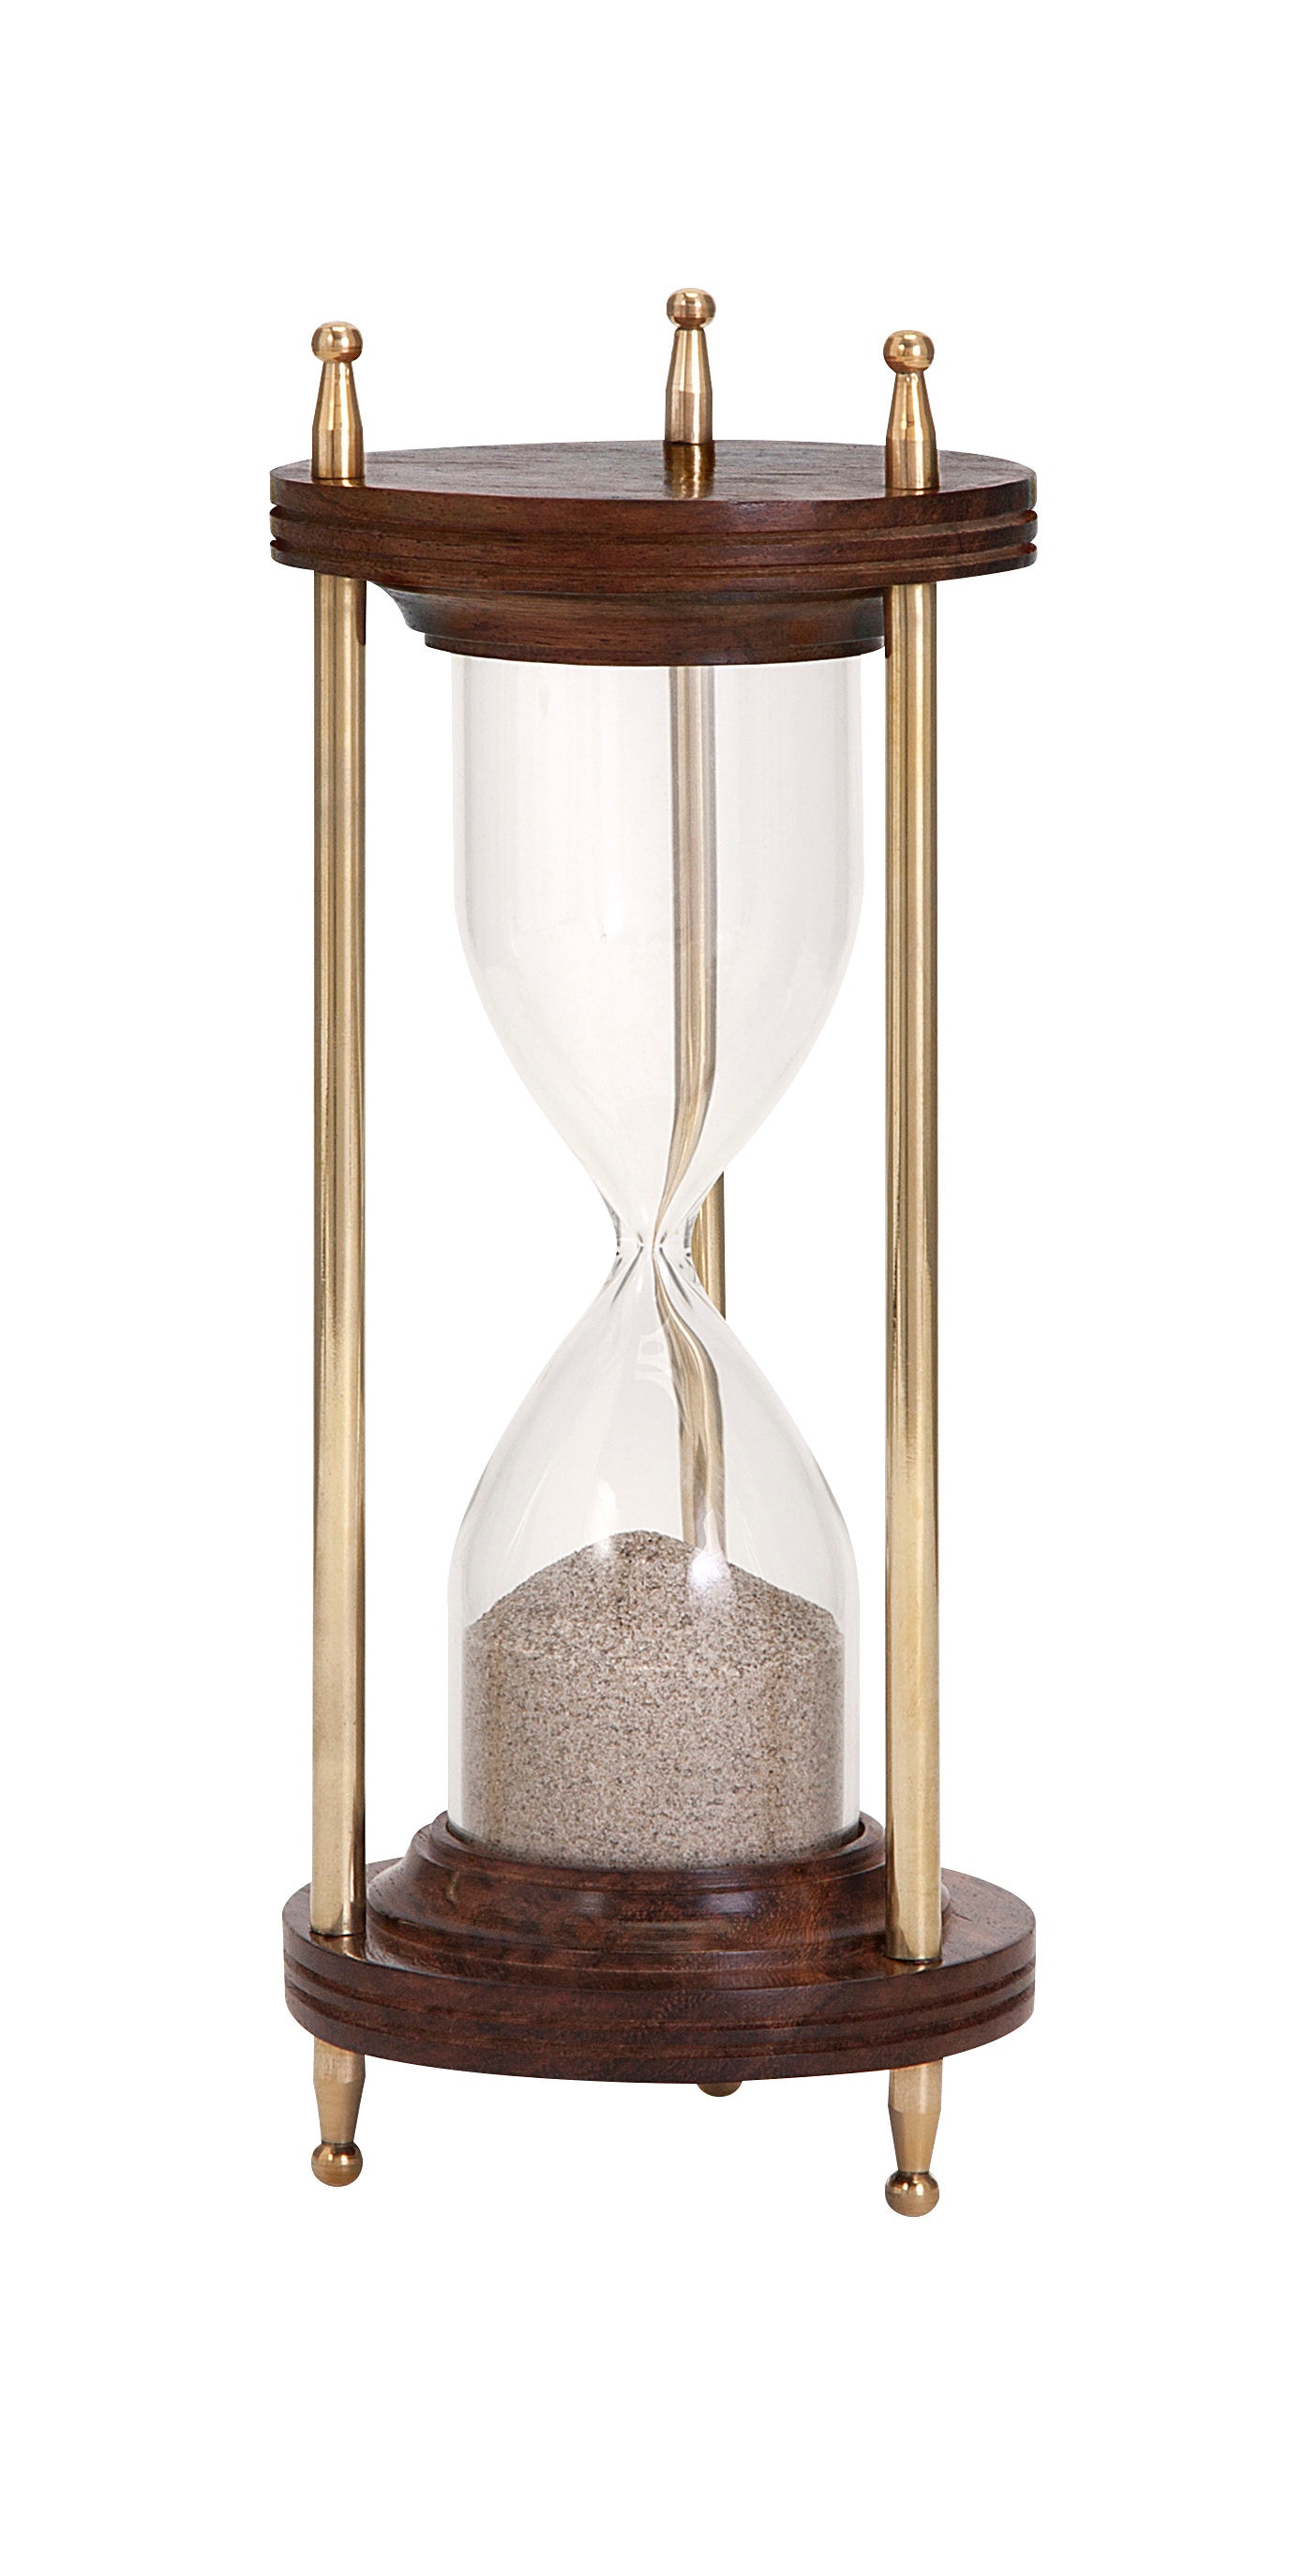 IMAX Corporation Pratt Large Hourglass with Gift Box in Brown 